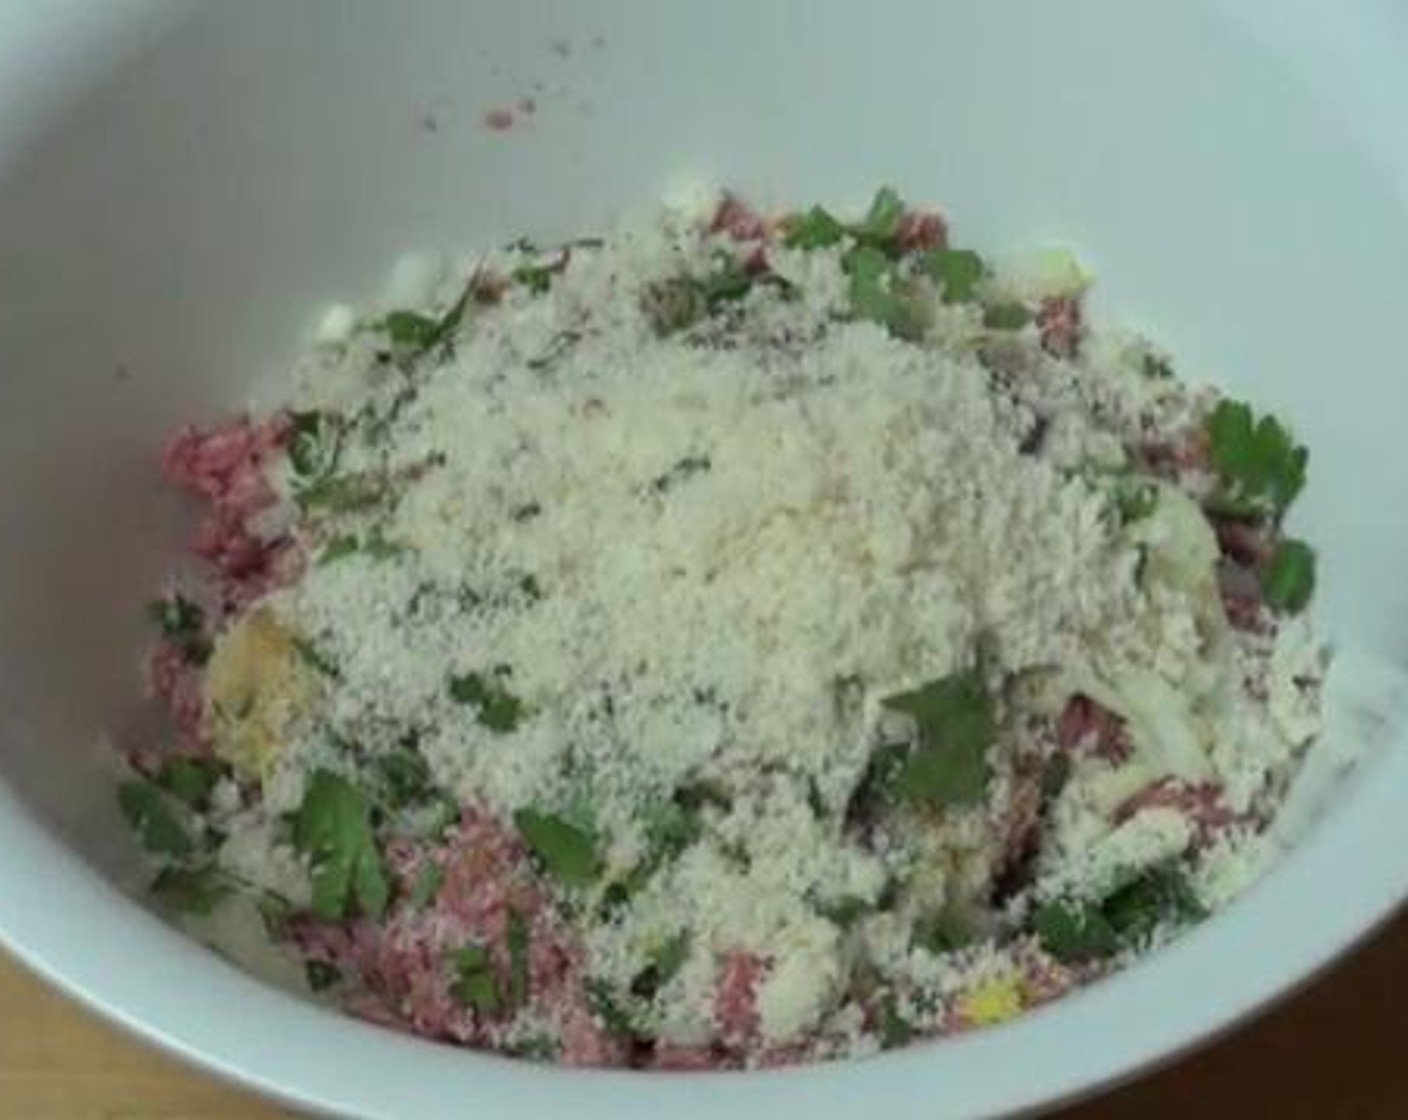 step 1 In a mixing bowl, mix the Ground Lamb (2.2 lb), Yellow Onion (1), Garlic (1 clove), Fresh Parsley (to taste), Ground Cumin (1/2 Tbsp), Ground Allspice (1 tsp), zest from Lemon (1/8), Breadcrumbs (1/2 cup), and Egg (1).